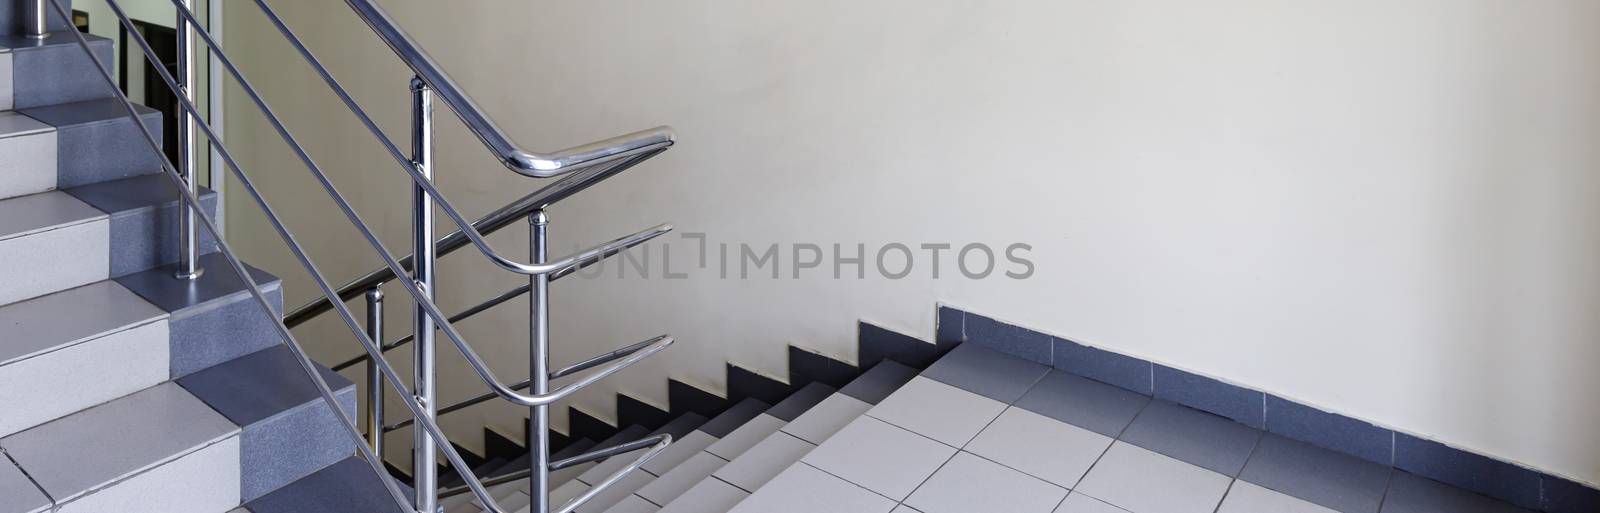 The interior staircase between floors in high-rise building by bonilook